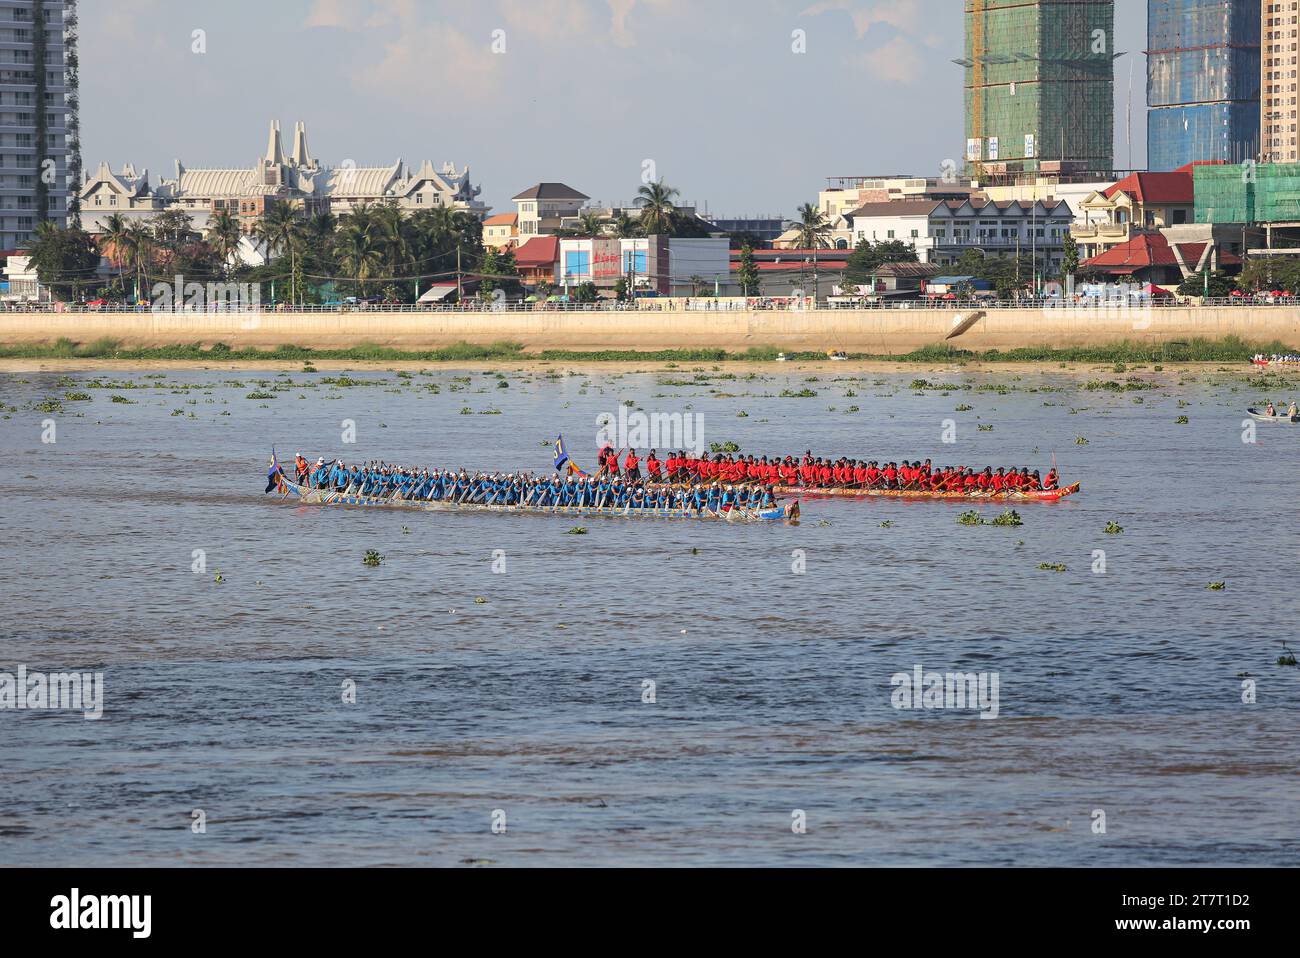 Dragonboats racing competition for Bon Om Touk Water Festival in Phnom Penh on Tonle Sap & Mekong River confluence, traditional boat races, Cambodia Stock Photo